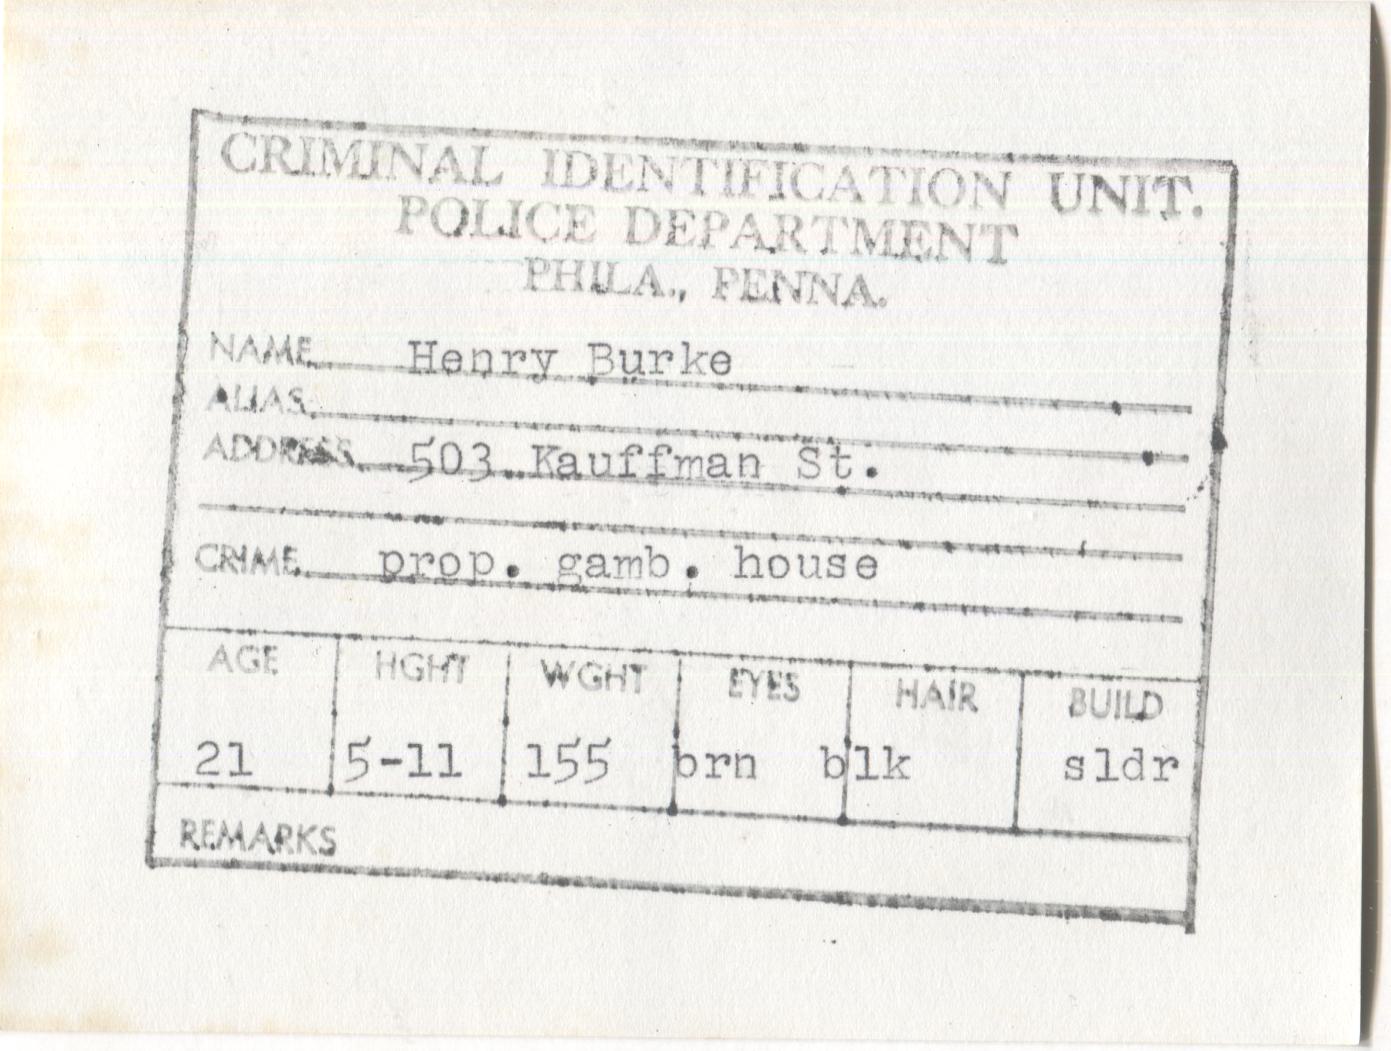 Henry Burke Mugshot - Arrested on 4/23/1961 for Being a Proprietor of a Gambling House